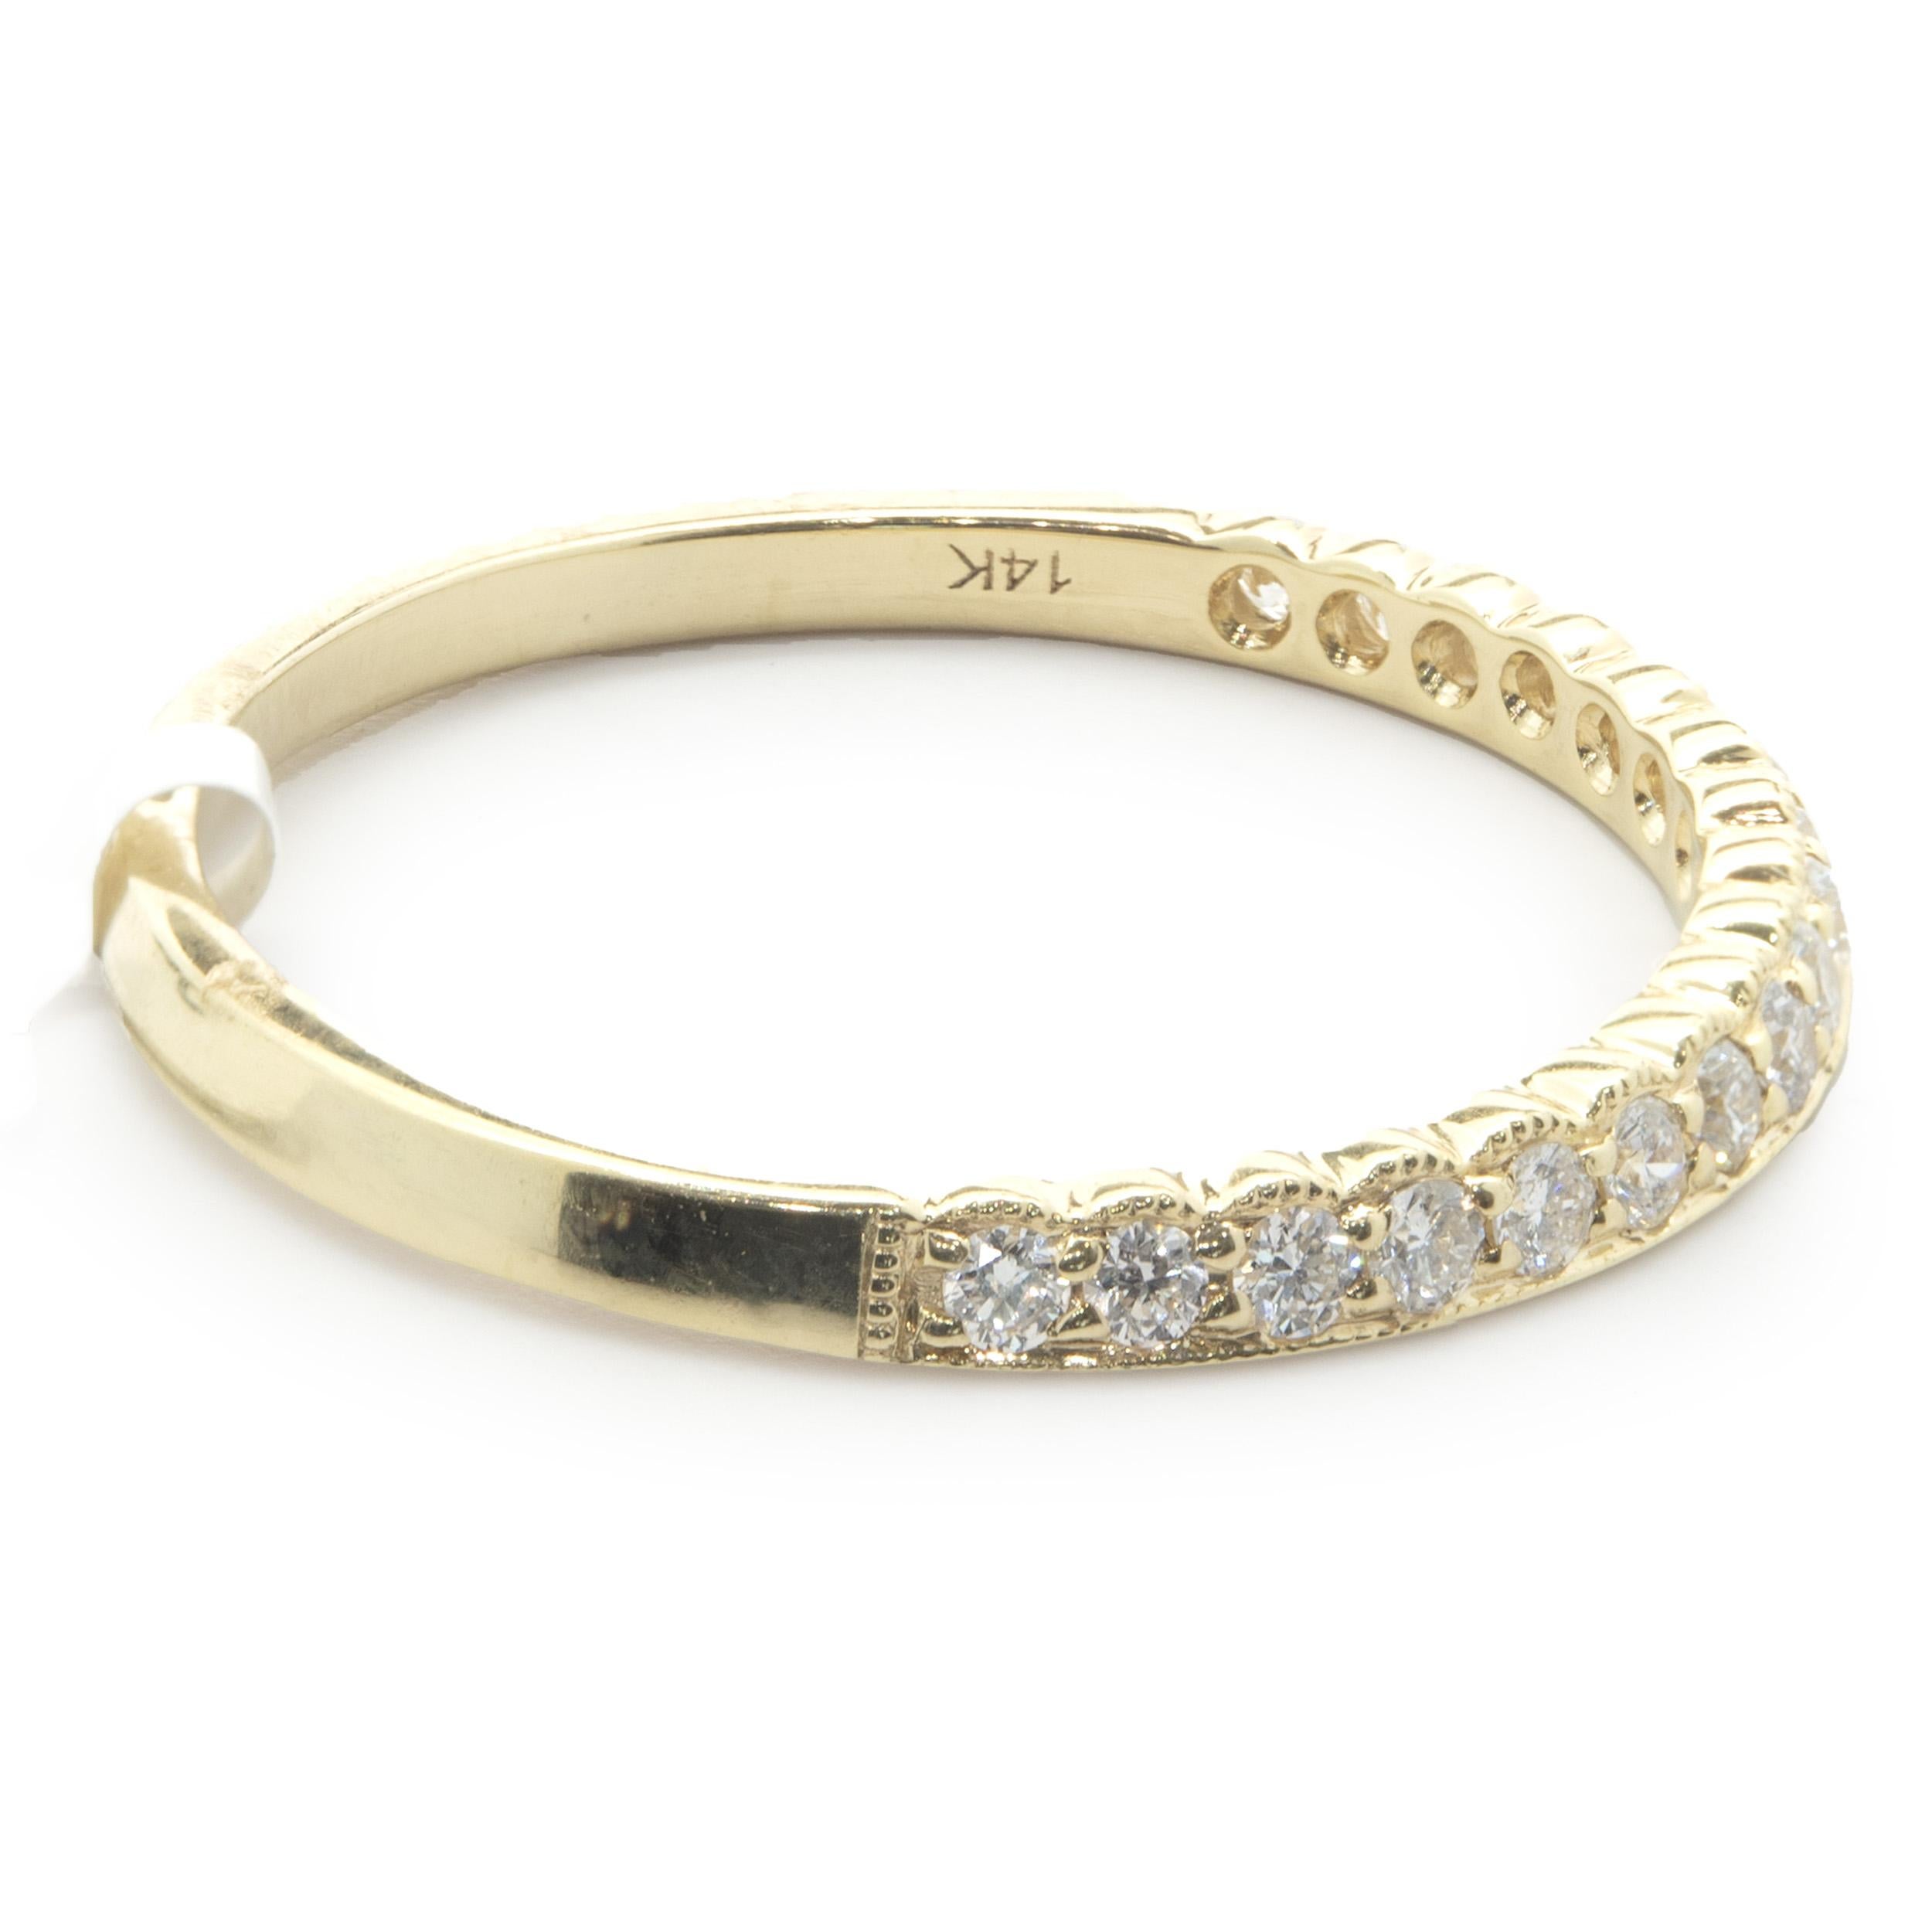 Designer: Custom
Material: 14K yellow gold
Diamond: 17 round brilliant cut = 0.22cttw
Color: G
Clarity: SI1
Size: 6.5 (complimentary sizing available upon request)
Weight: 1.39 grams